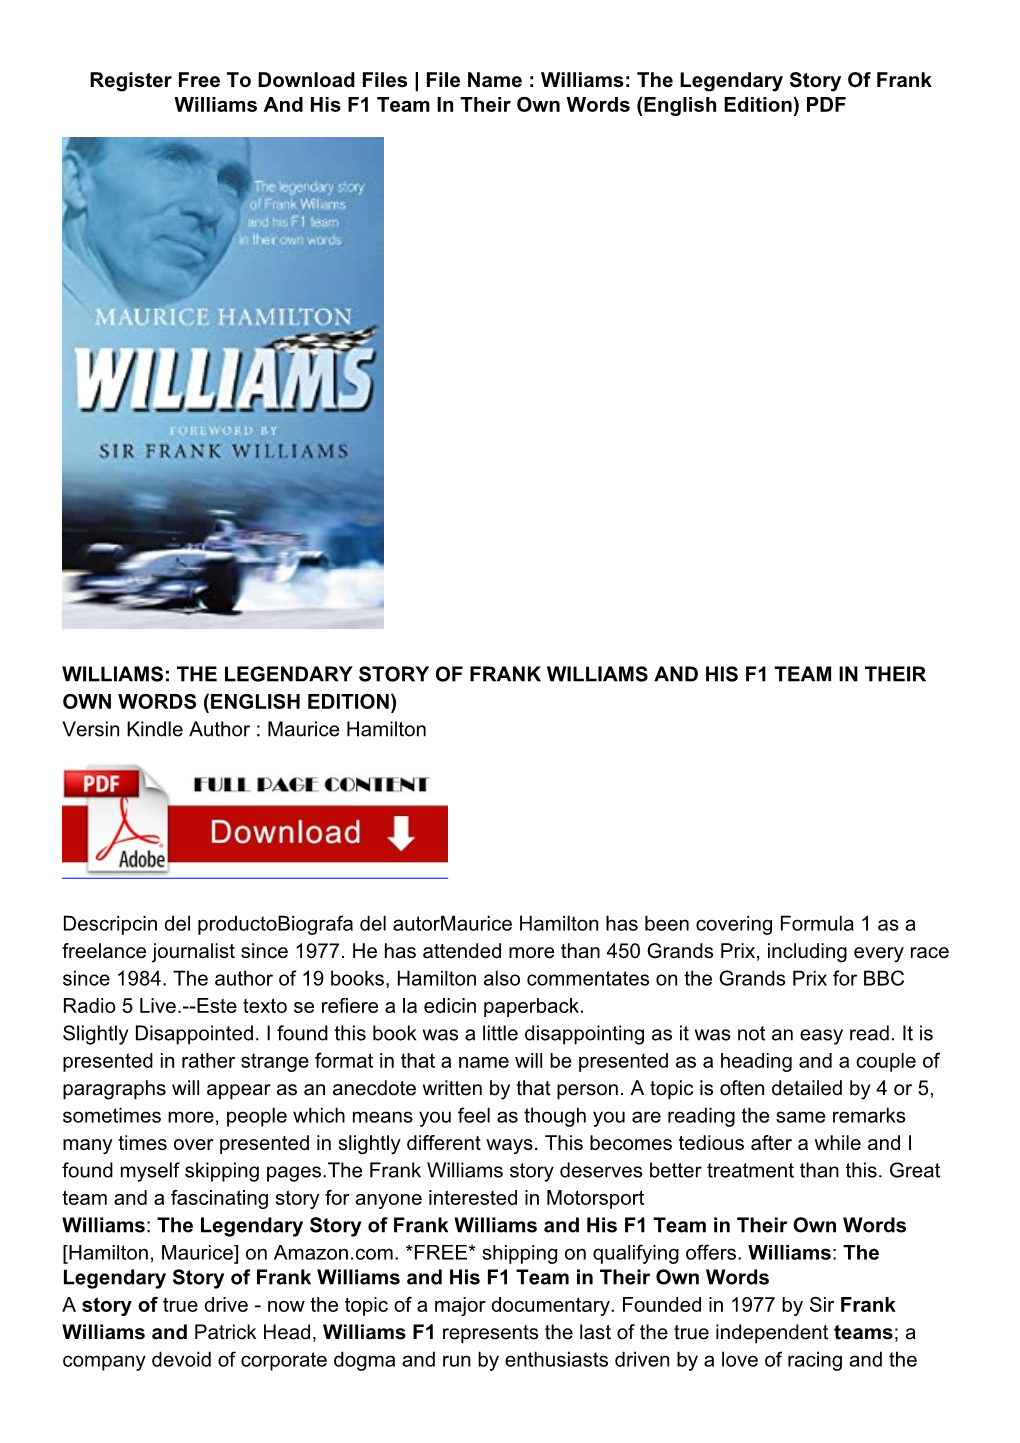 The Legendary Story of Frank Williams and His F1 Team in Their Own Words (English Edition) PDF